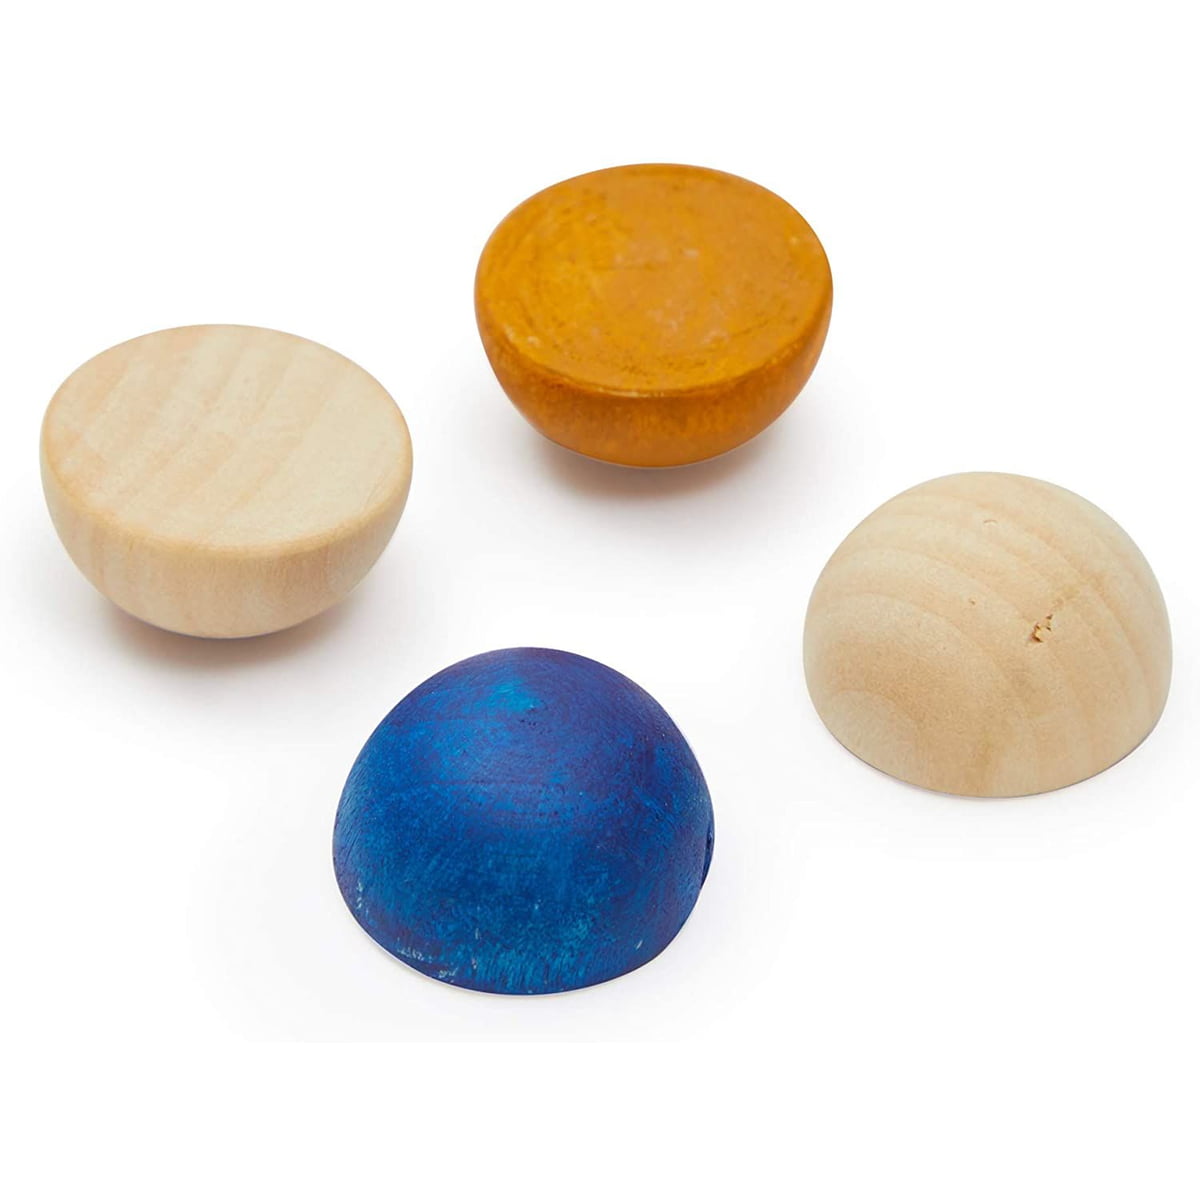 ningxiao586 Split Solid Natural Wooden Craft Round Ball DIY Accessories Wood Color Big Painted Ball 1 cm/2 cm/3 cm/4 cm/5 cm/6 cm